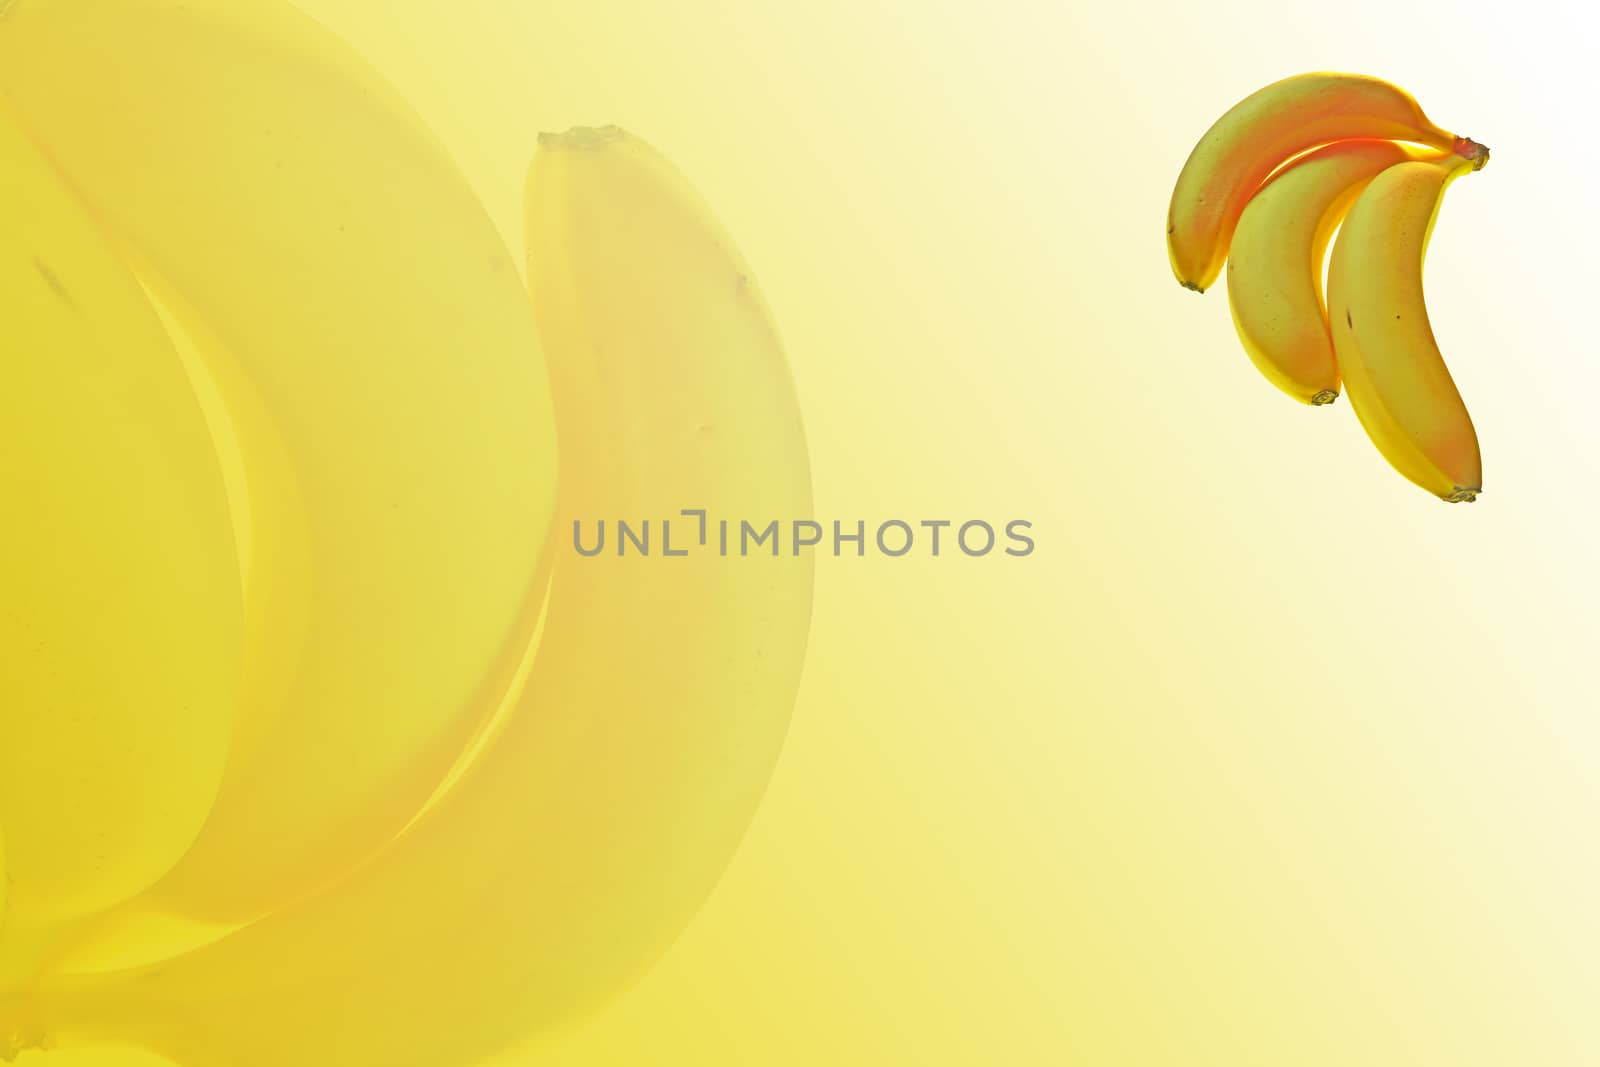  three ripe bananas on abstract yellow background